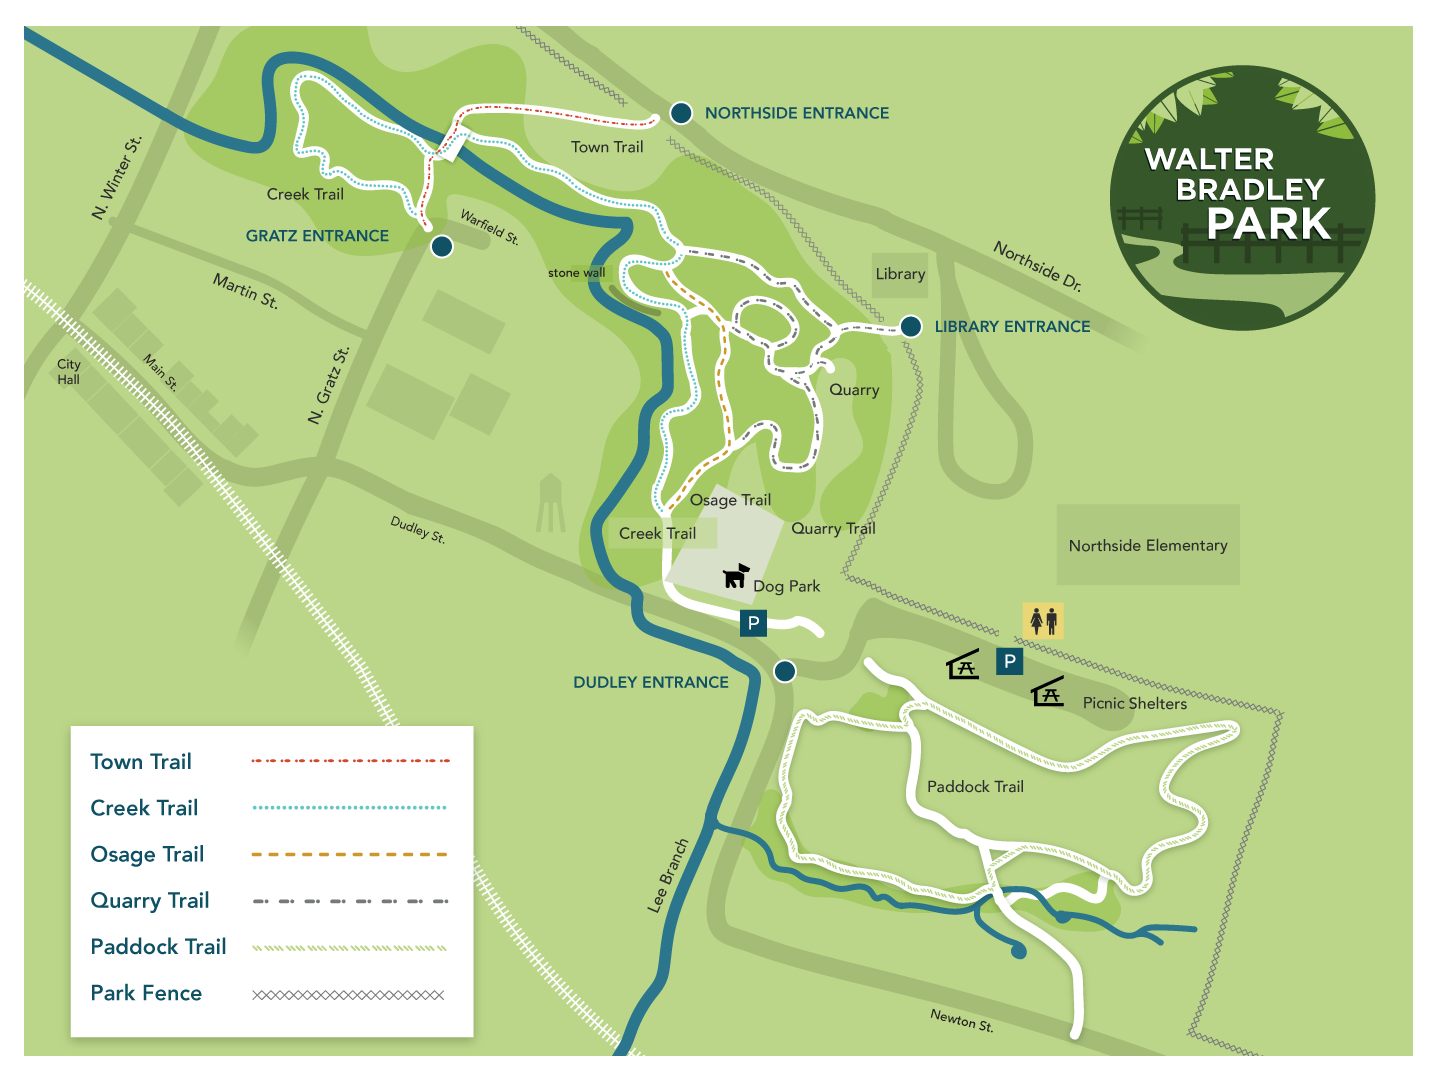 map of the park showing trails and parking